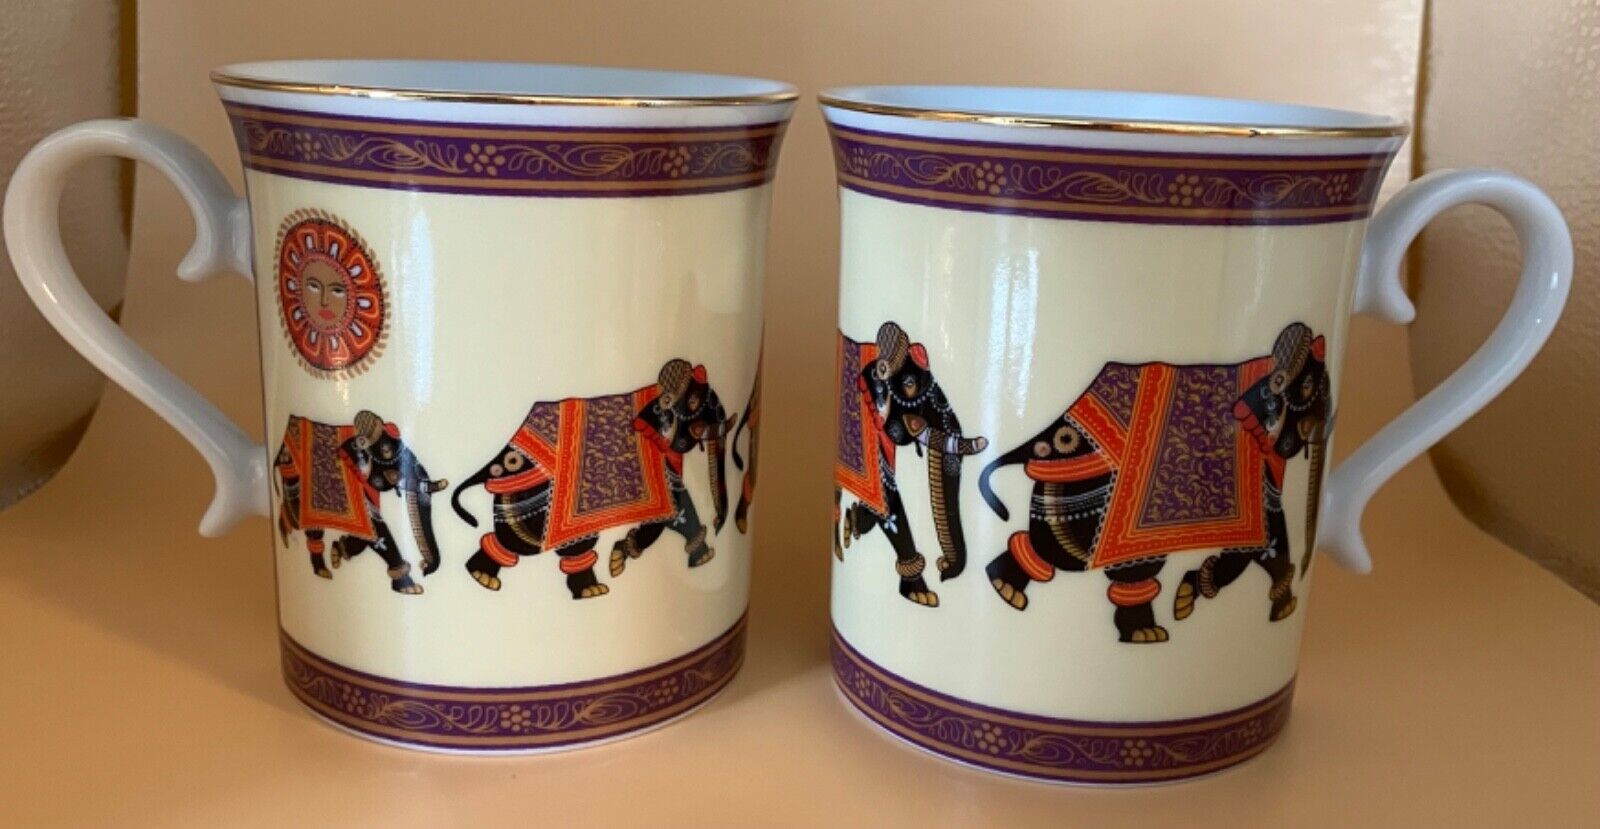 Pair of FESTIVAL ELEPHANTS Porcelain Coffee Mugs, Past Times Made in Japan, 8443